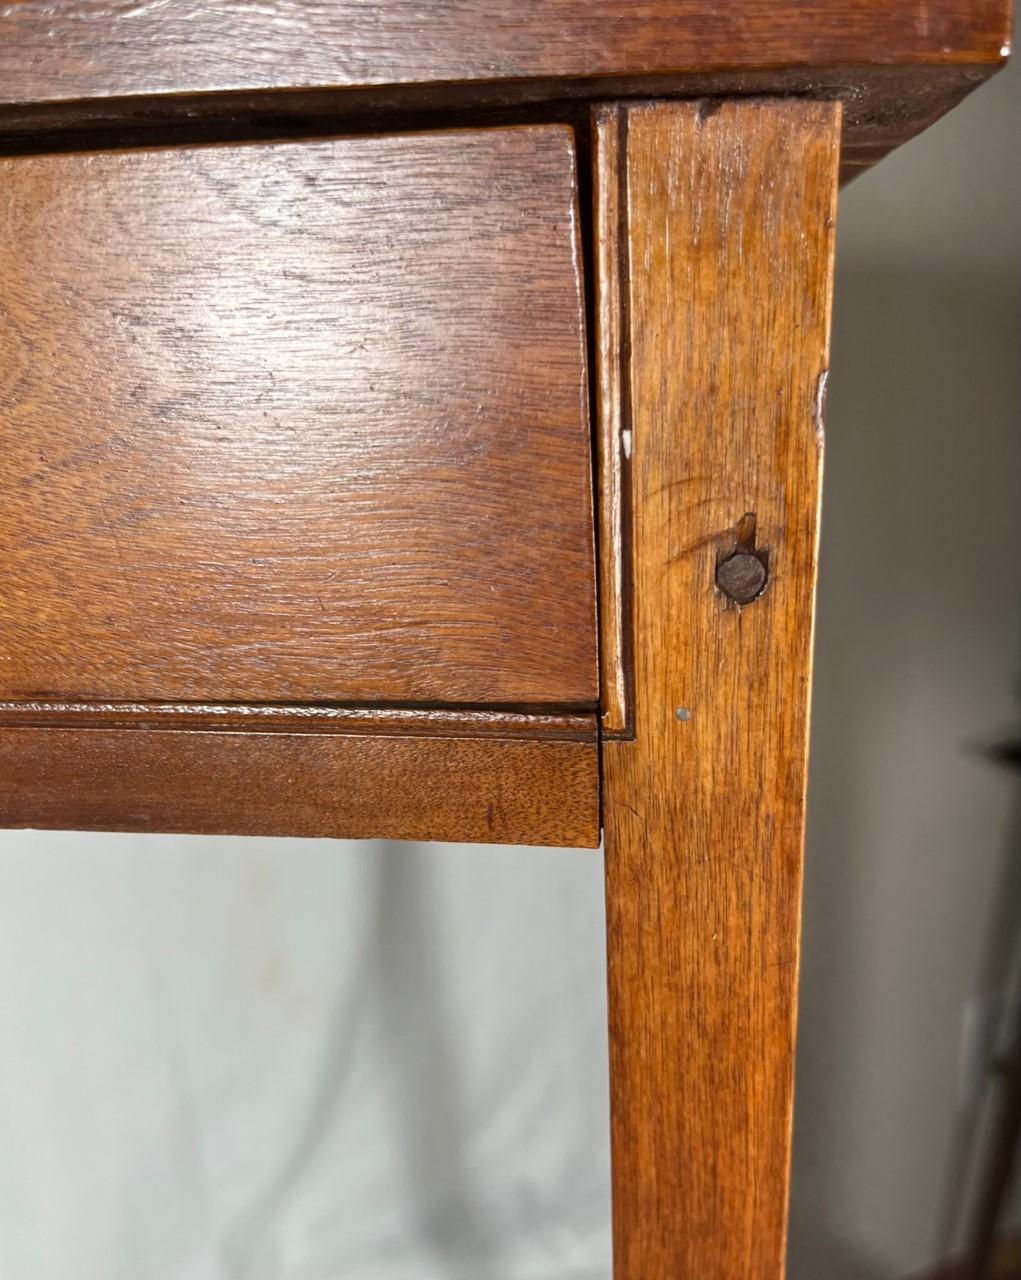 18th century American Hepplewhite Federal Style Mahogany Side Table.

This is a fabulous Mahogany side table. The relatively plain design results in a rather elegant look. The classic one drawer table top is raised on four slender tapered legs. A